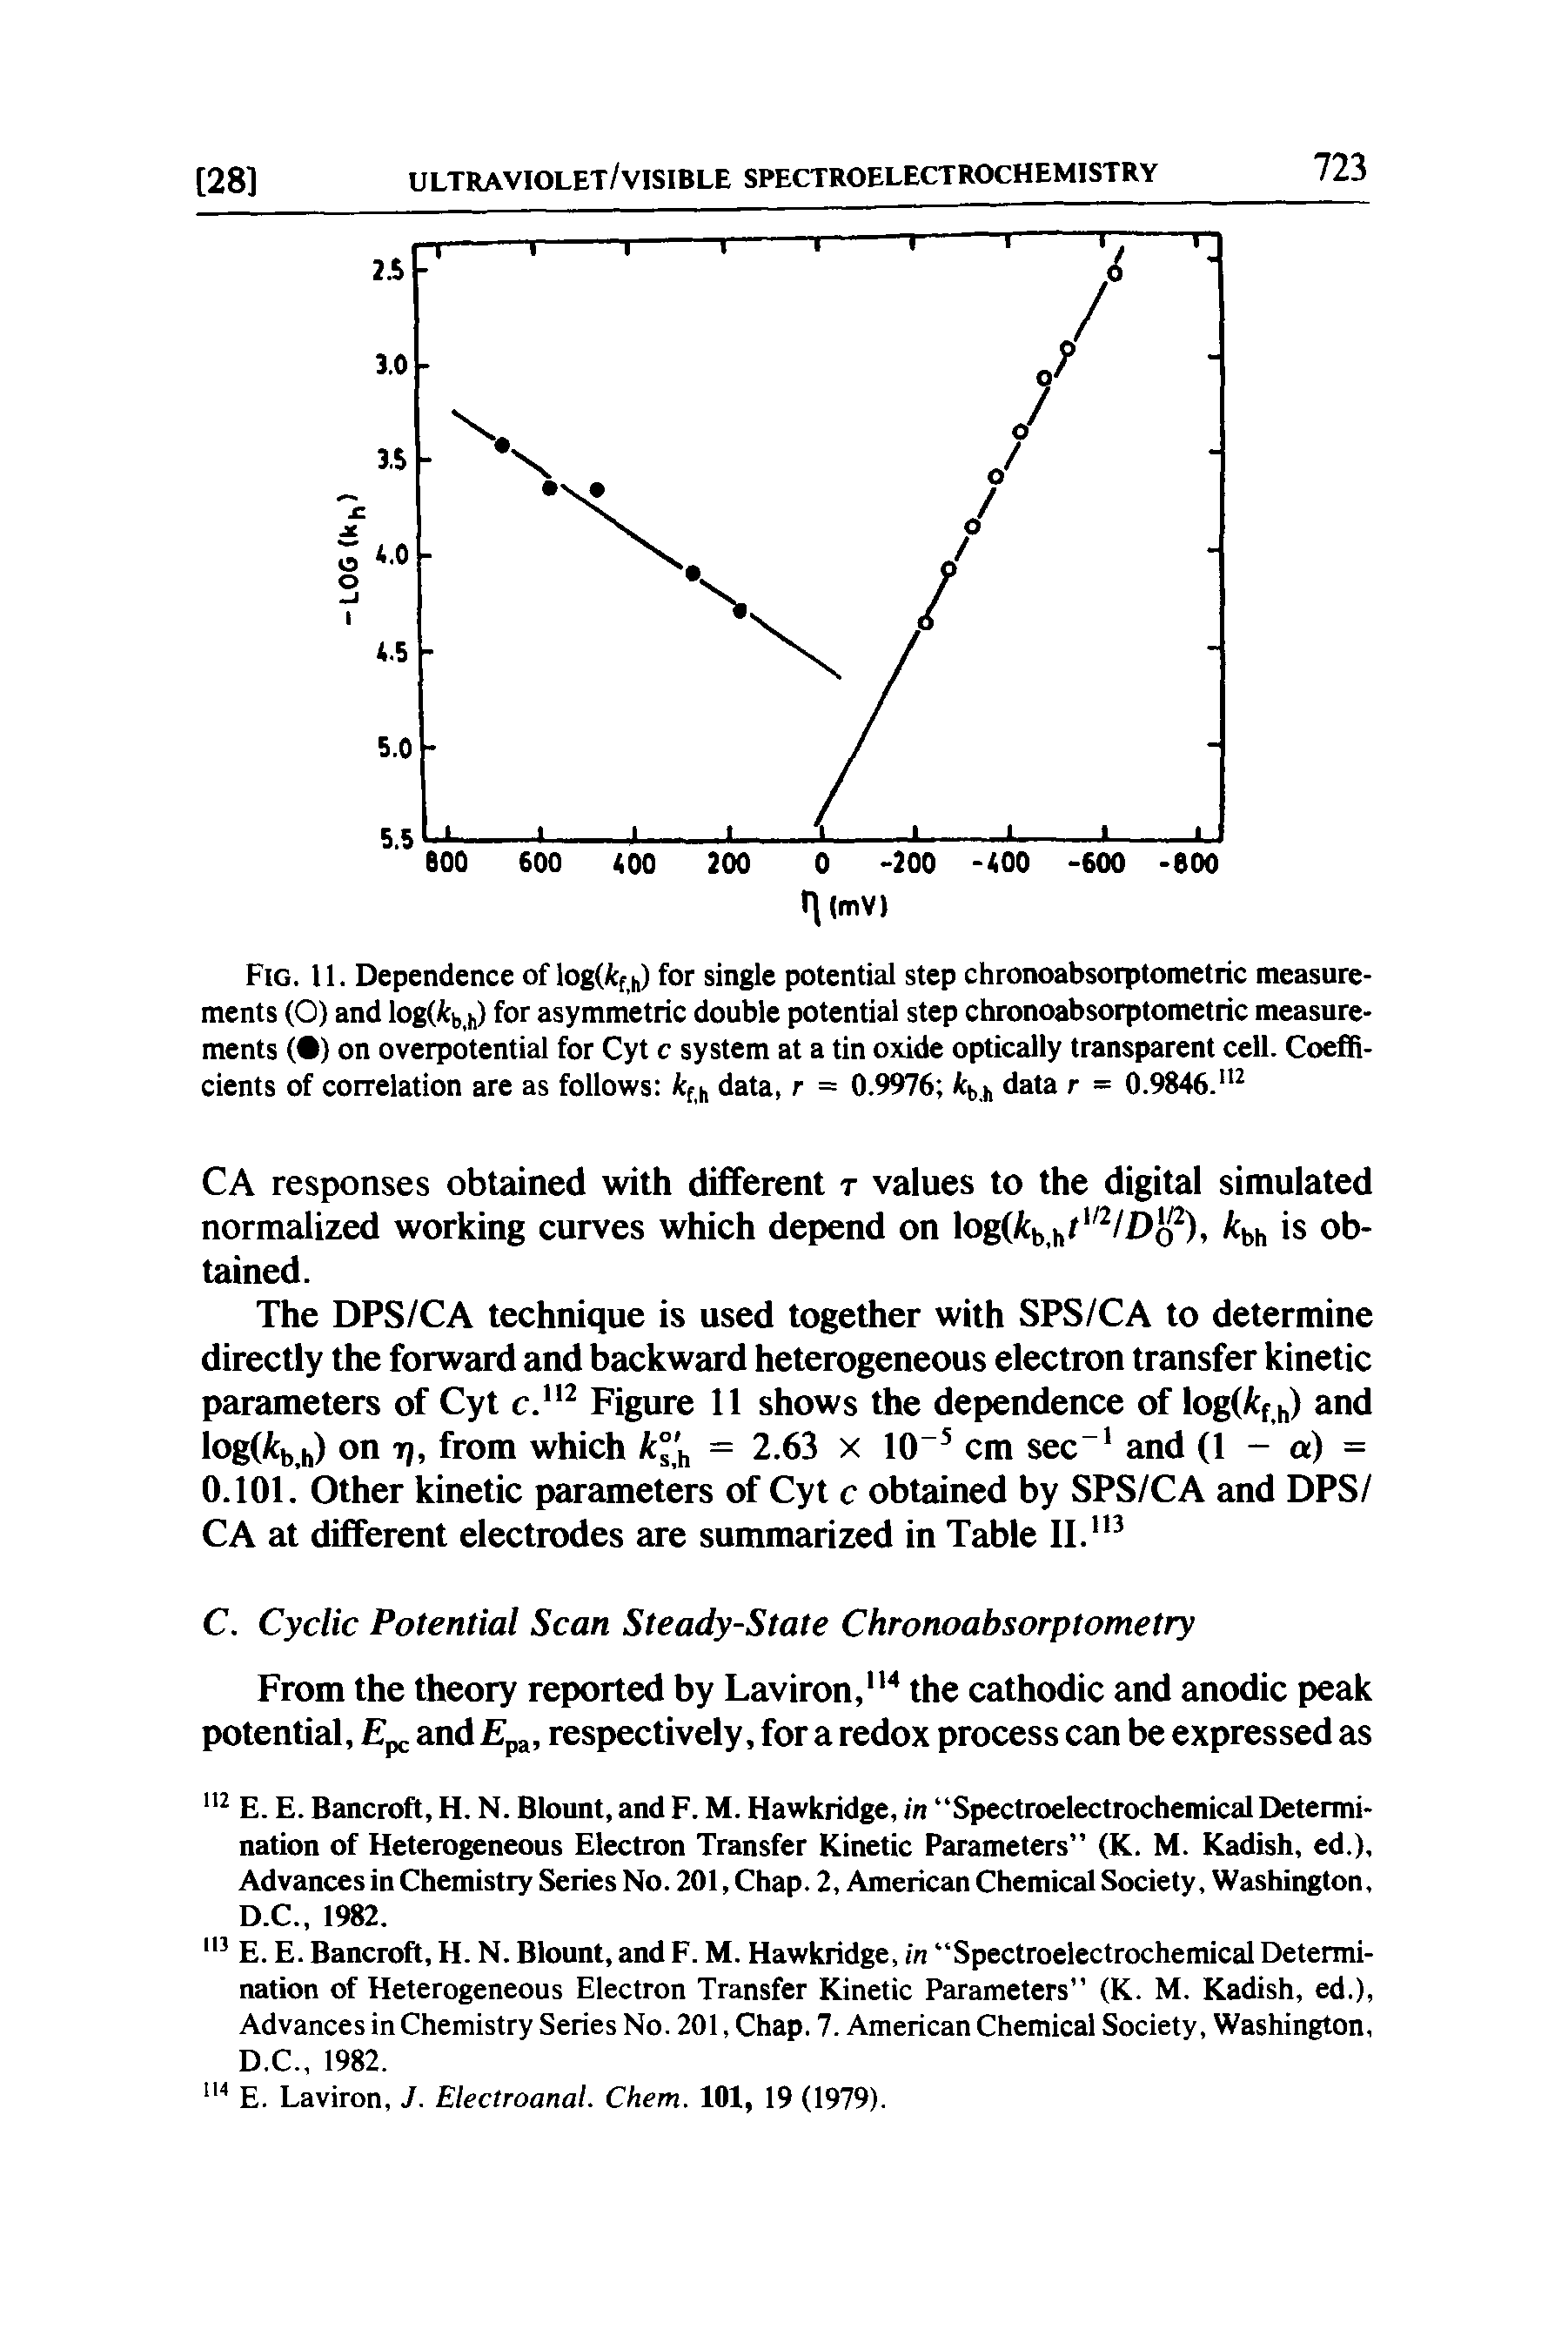 Fig. 11. Dependence of log(itf,h) for single potential step chronoabsorptometric measurements (O) and log(fcb.h) for asymmetric double potential step chronoabsorptometric measurements ( ) on overpotential for Cyt c system at a tin oxide optically transparent cell. CoefB-cients of correlation are as follows data, r = 0.9976 tb,h 0.9846." ...